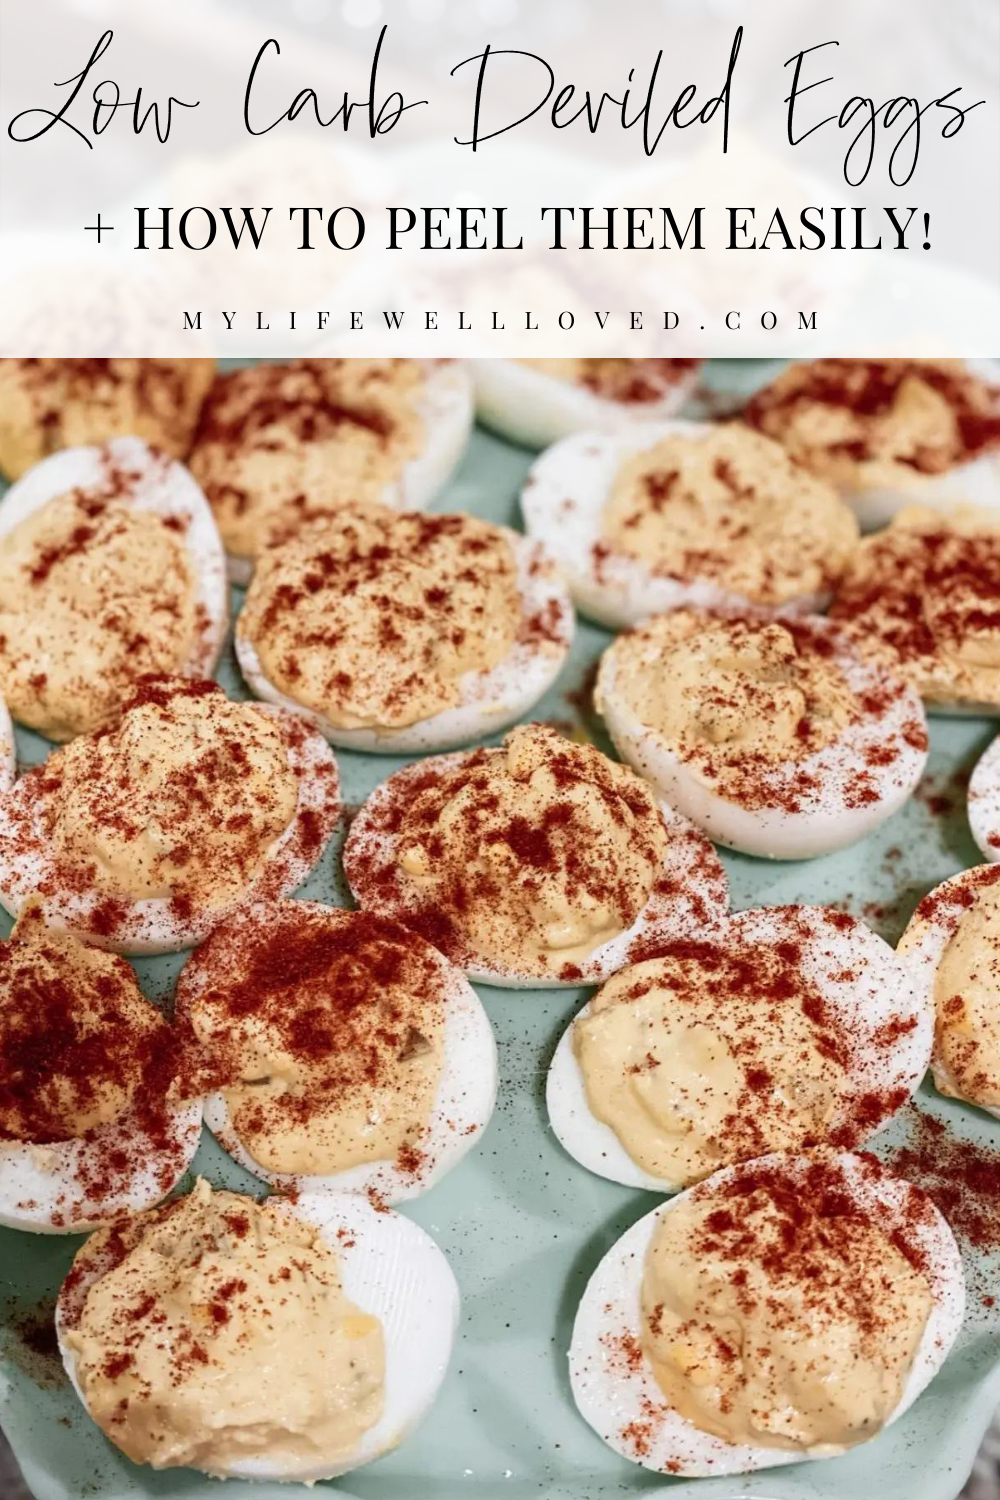 Healthy Snacks: Low Carb Keto Deviled Eggs Recipe by Alabama healthy living + food blogger, Heather Brown // My Life Well Loved